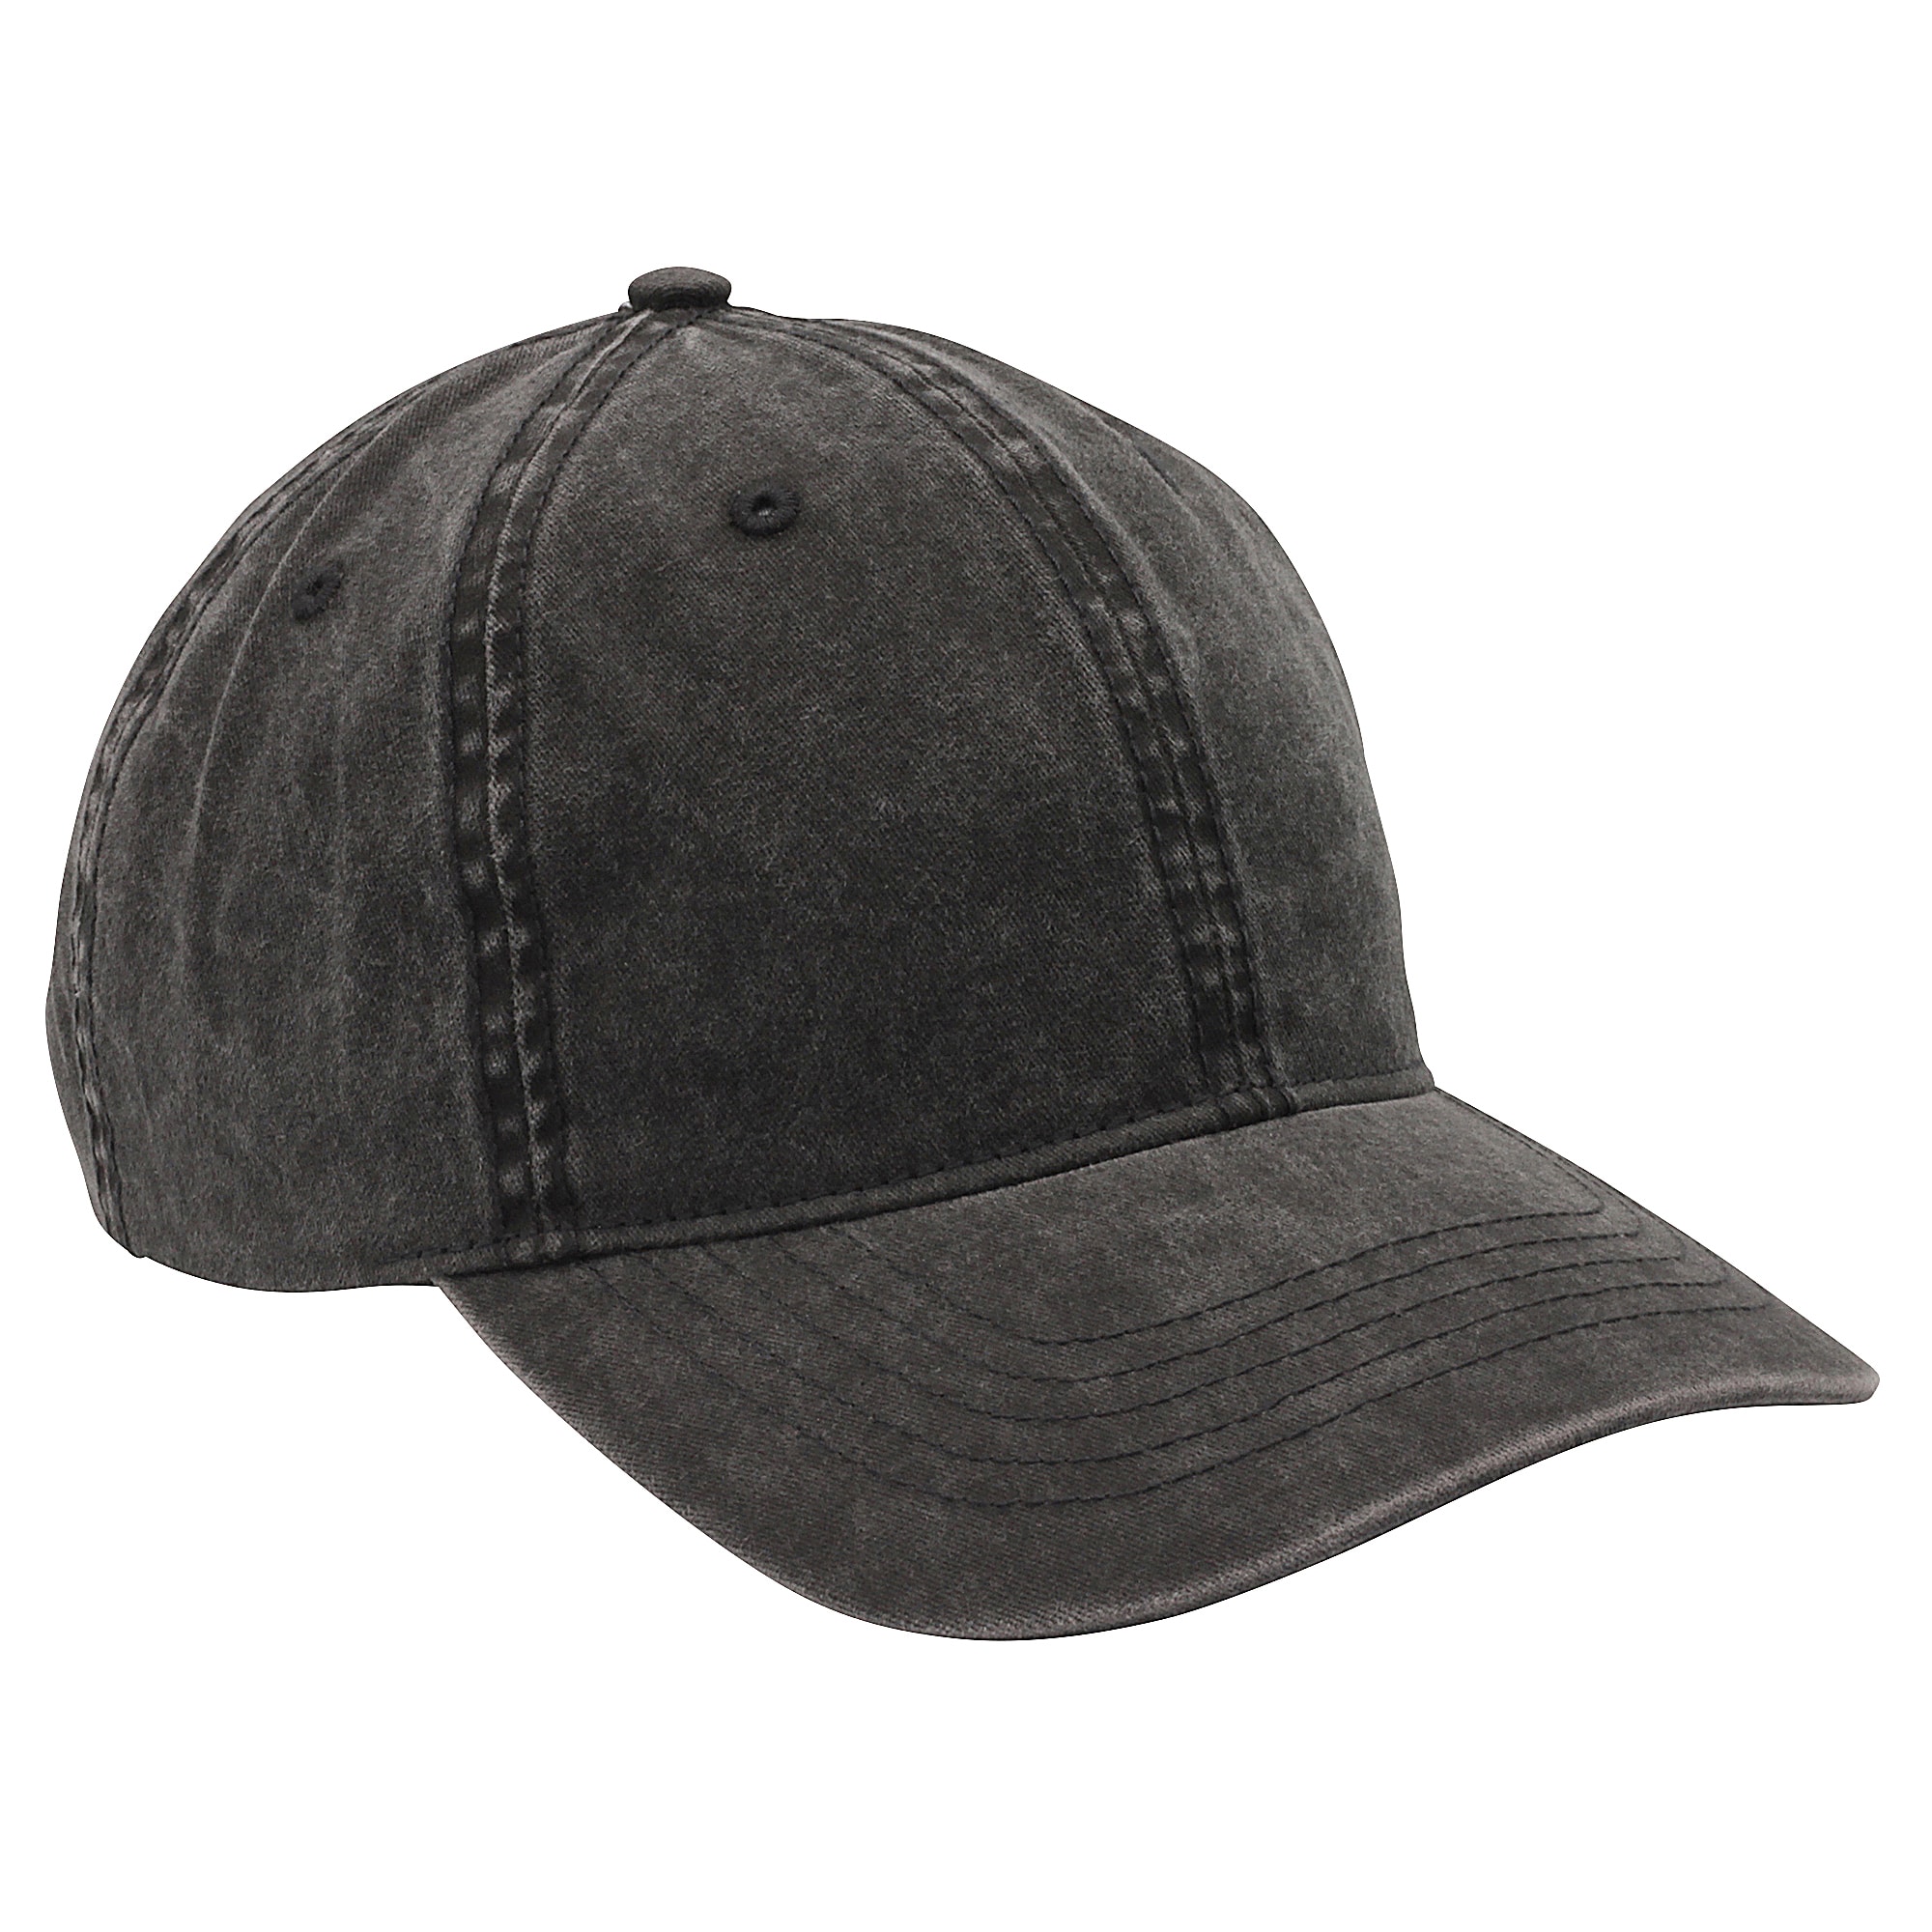 Infinity Brands Women's Black Washed Cotton Baseball Cap at Lowes.com